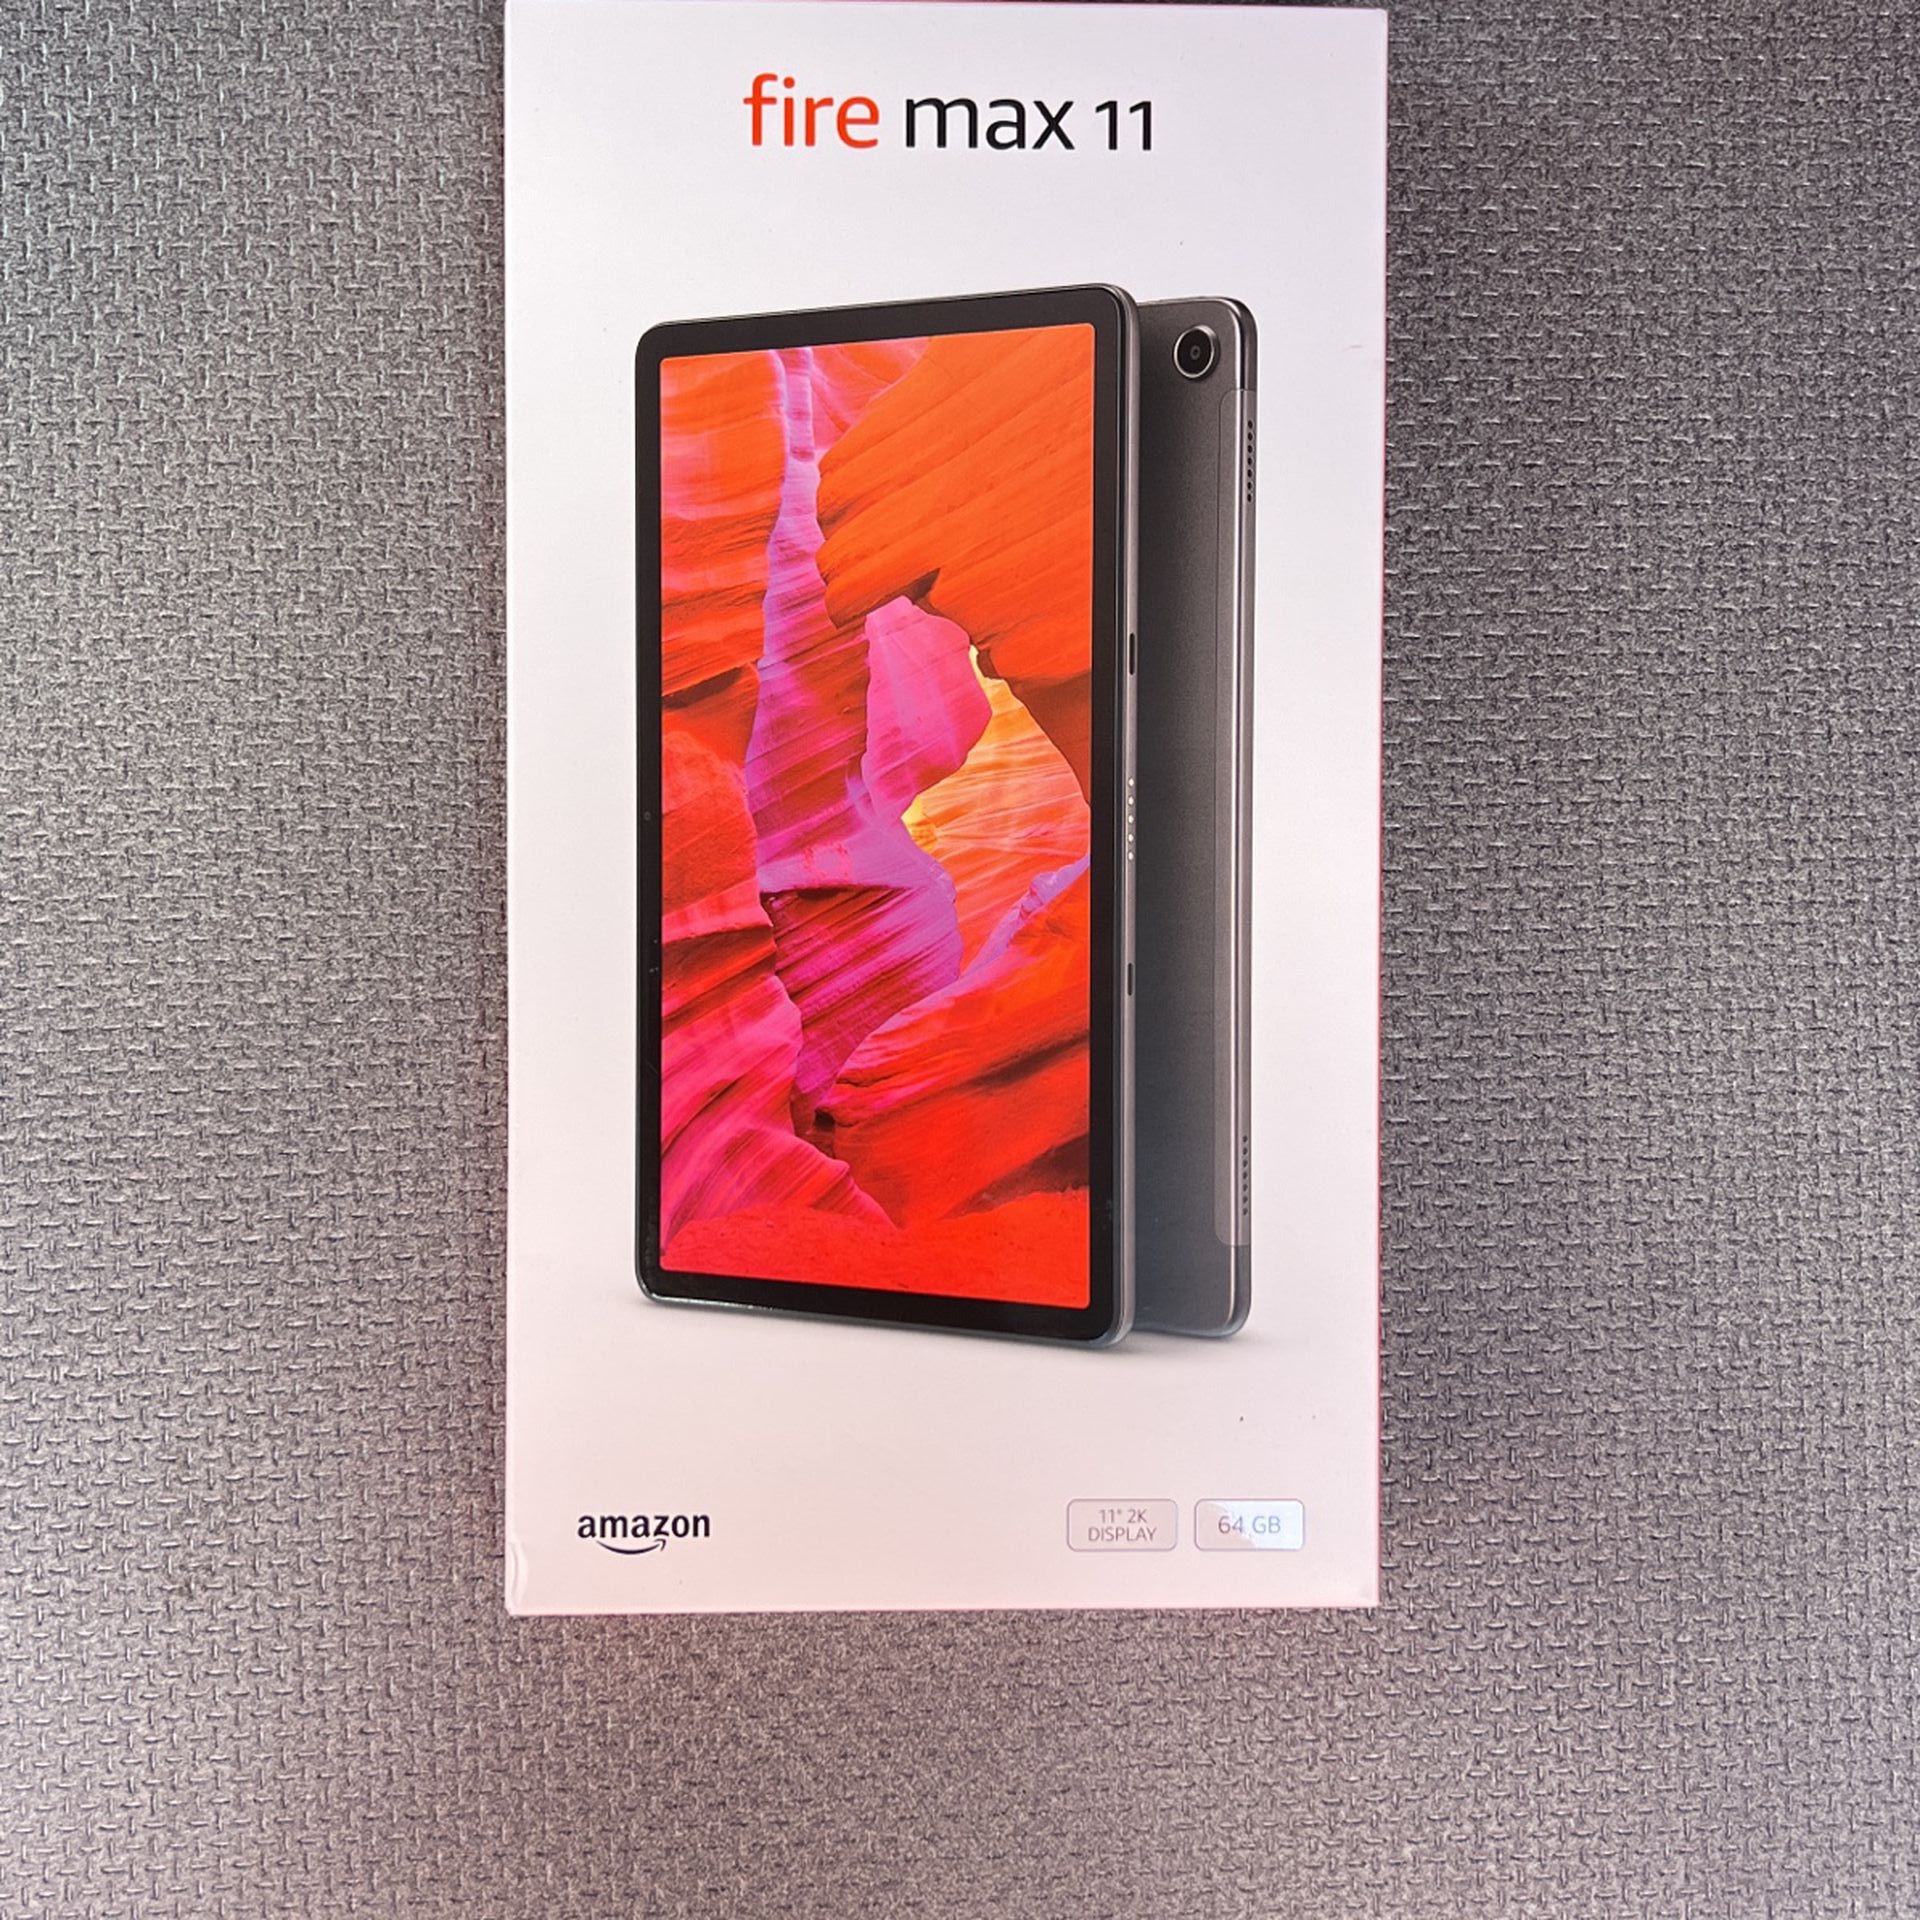 NEW Amazon Fire Max 11 tablet, 64 HB Gray 